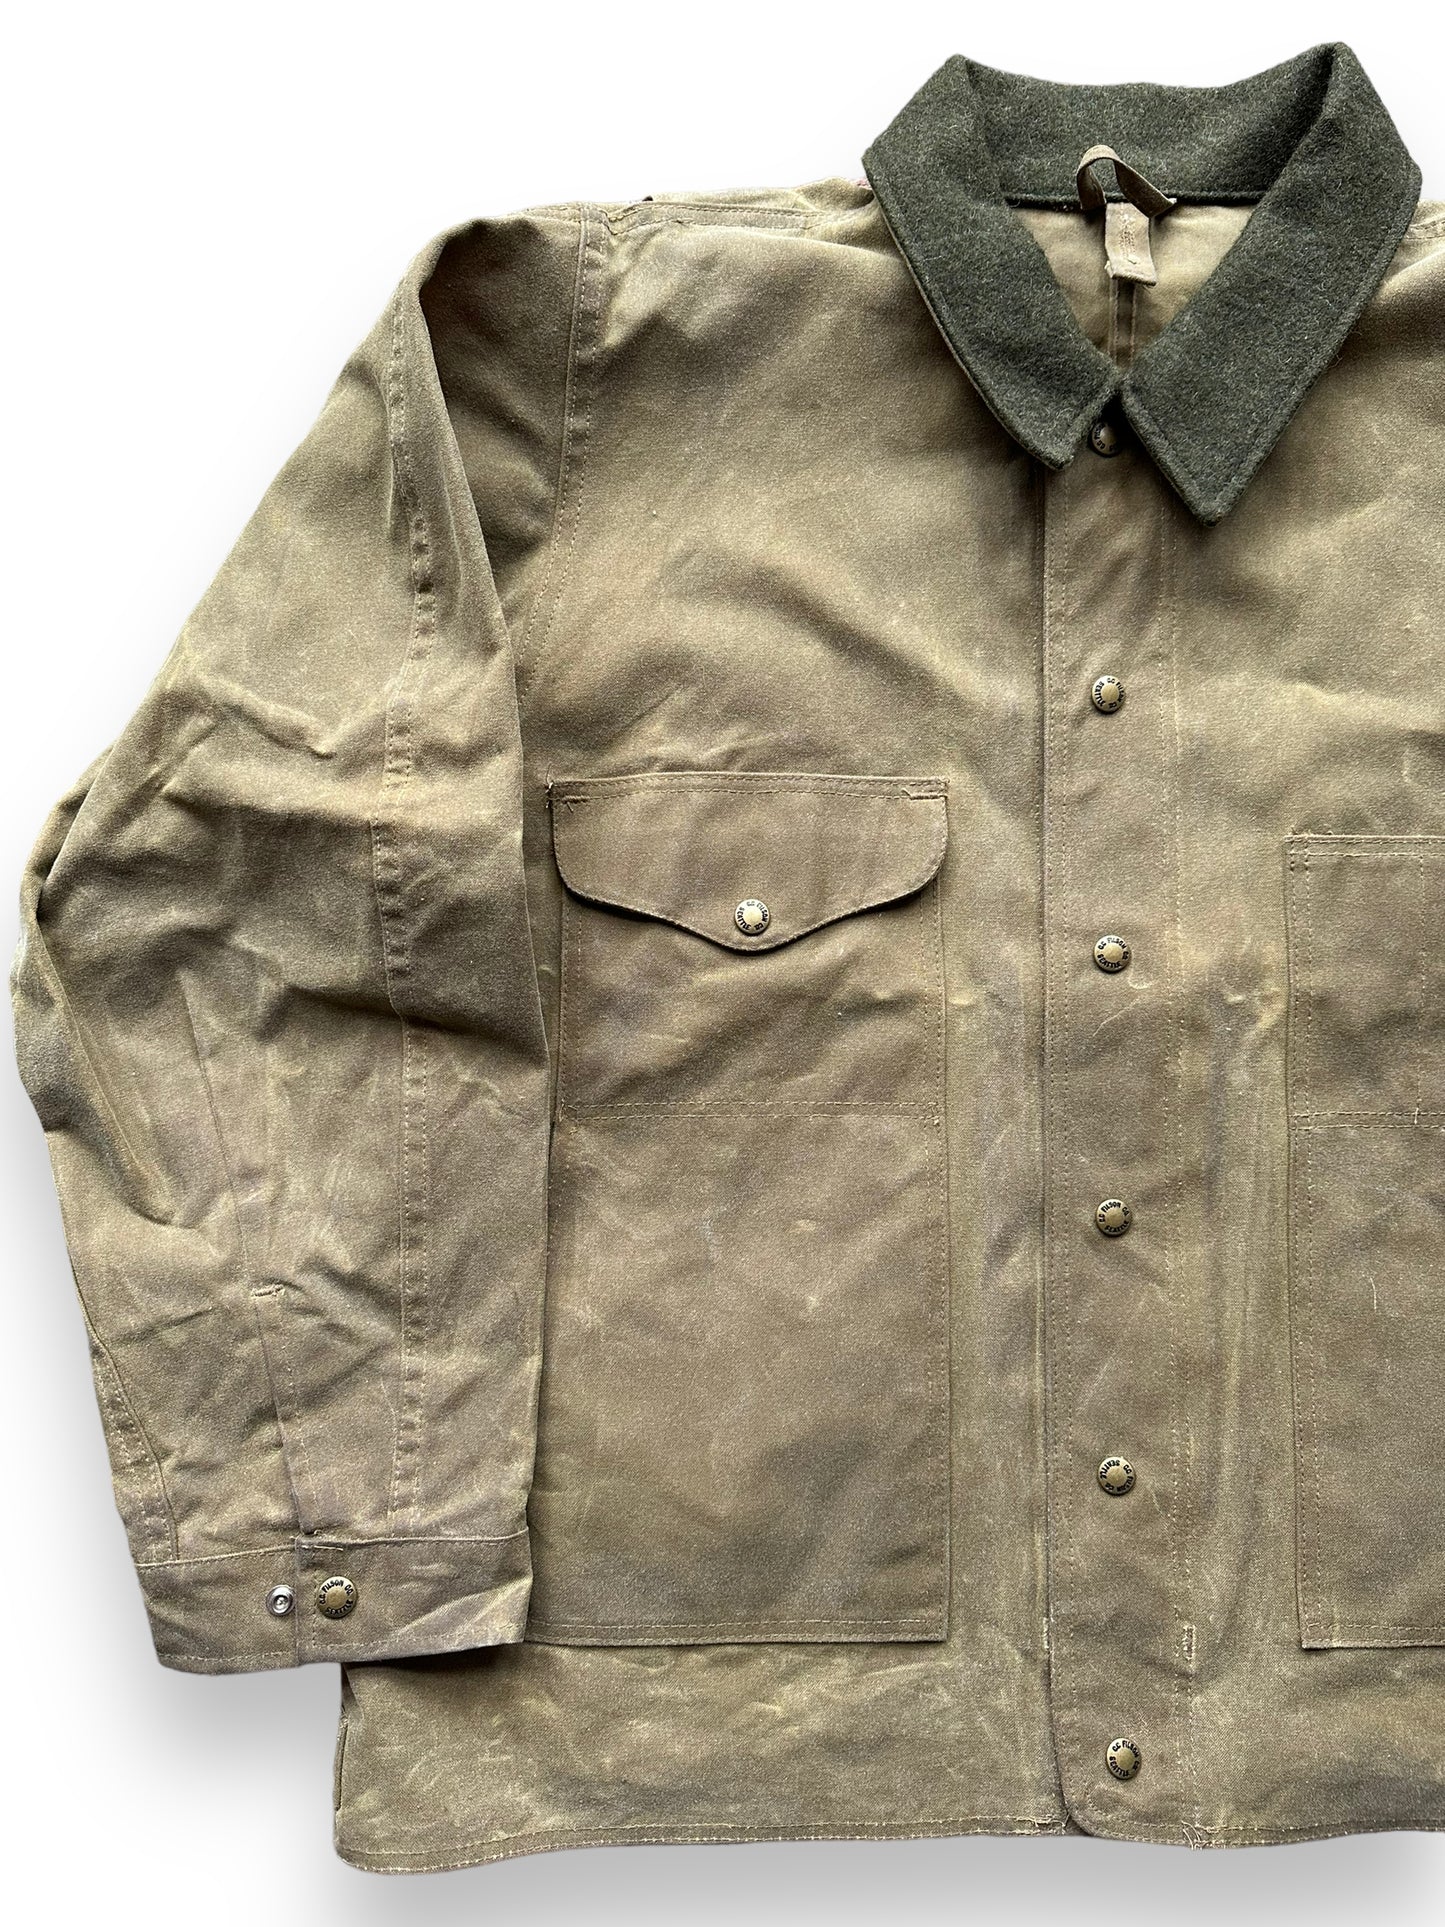 Front Right Side View of Filson Tin Cloth Jacket SZ XL |  Barn Owl Vintage Goods | Filson Workwear Seattle